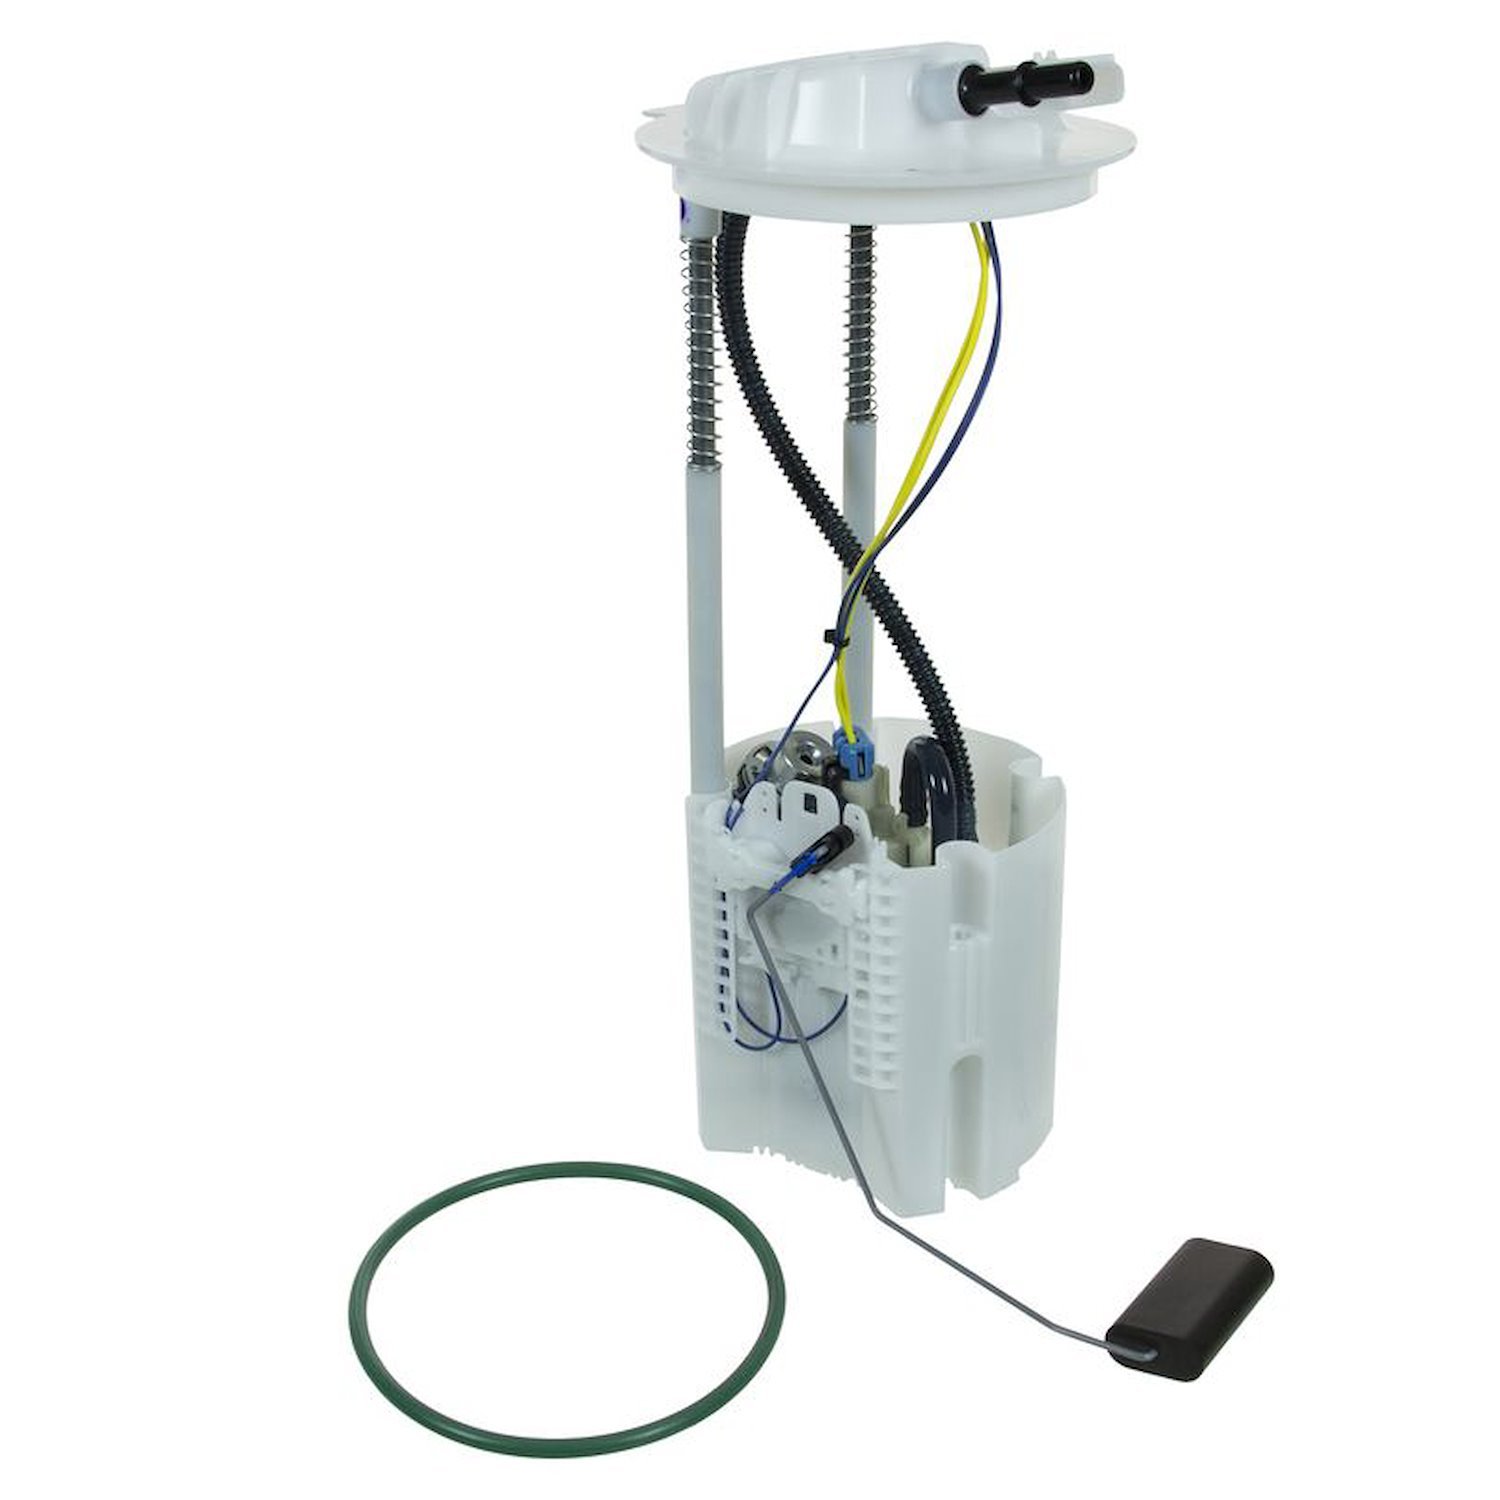 OE Chrysler/Dodge Replacement Fuel Pump Module Assembly for 2009-2014 Dodge Ram